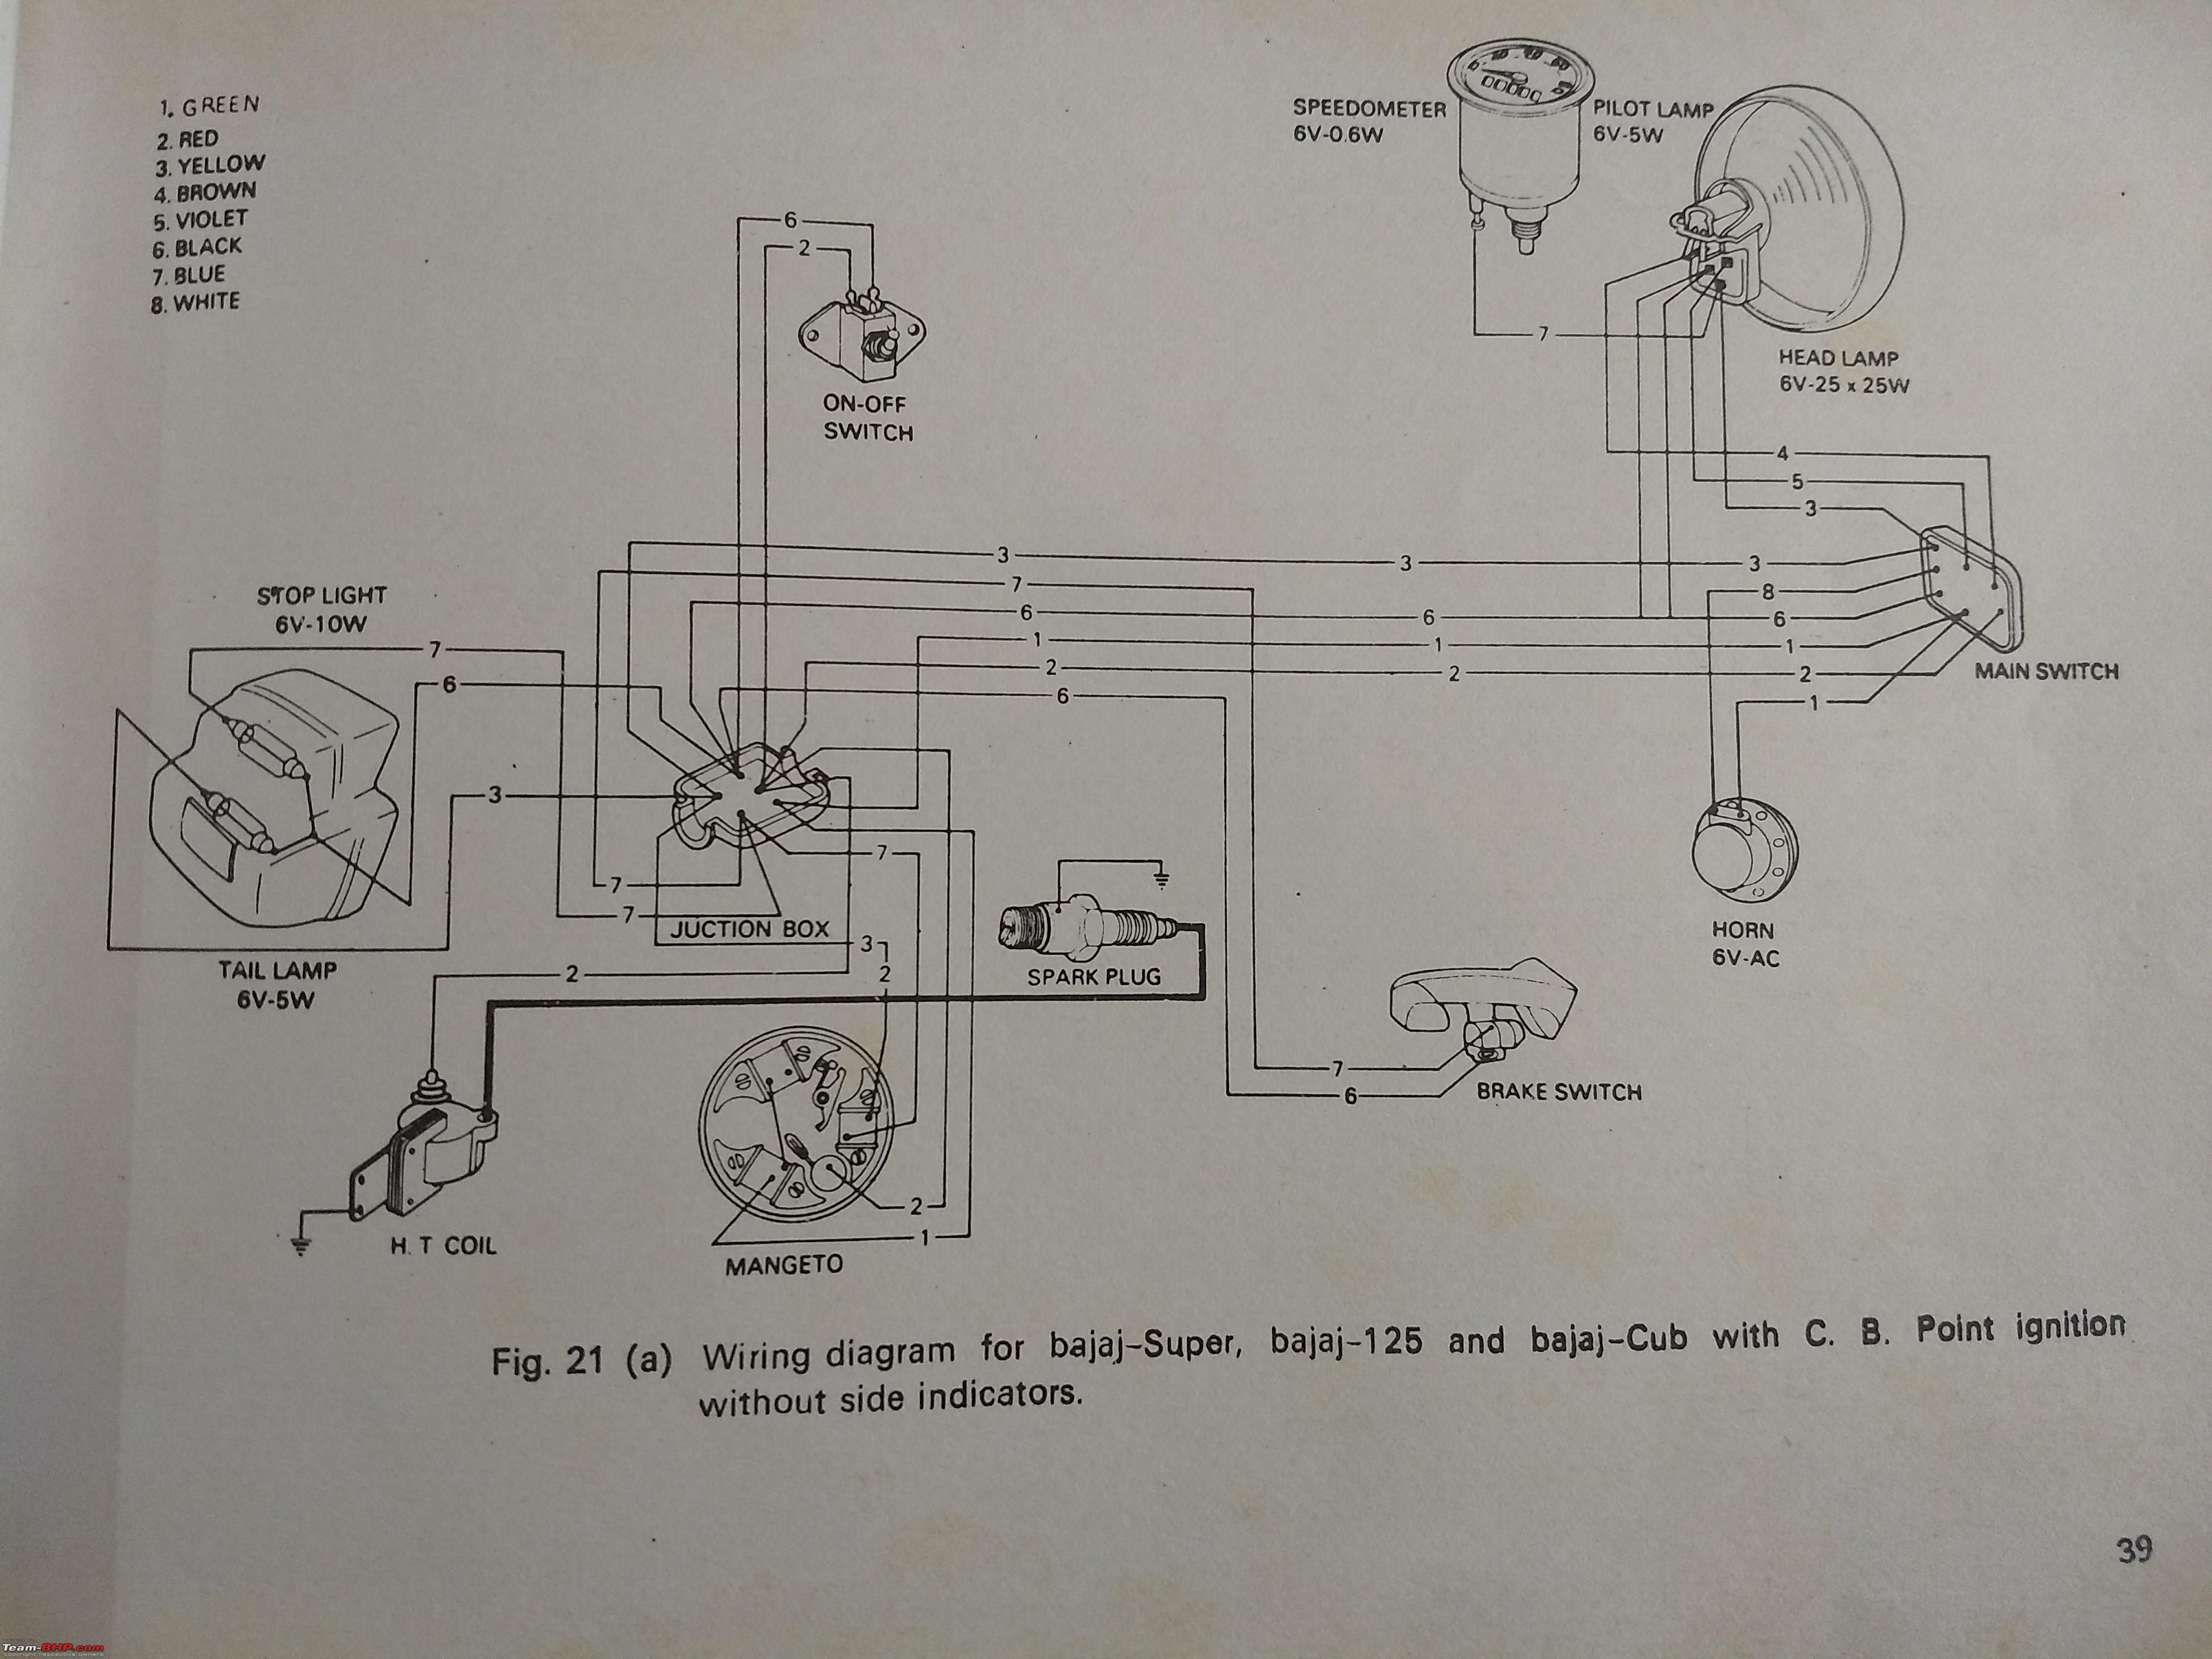 Wiring Diagrams Of Indian Two Wheelers Team Bhp